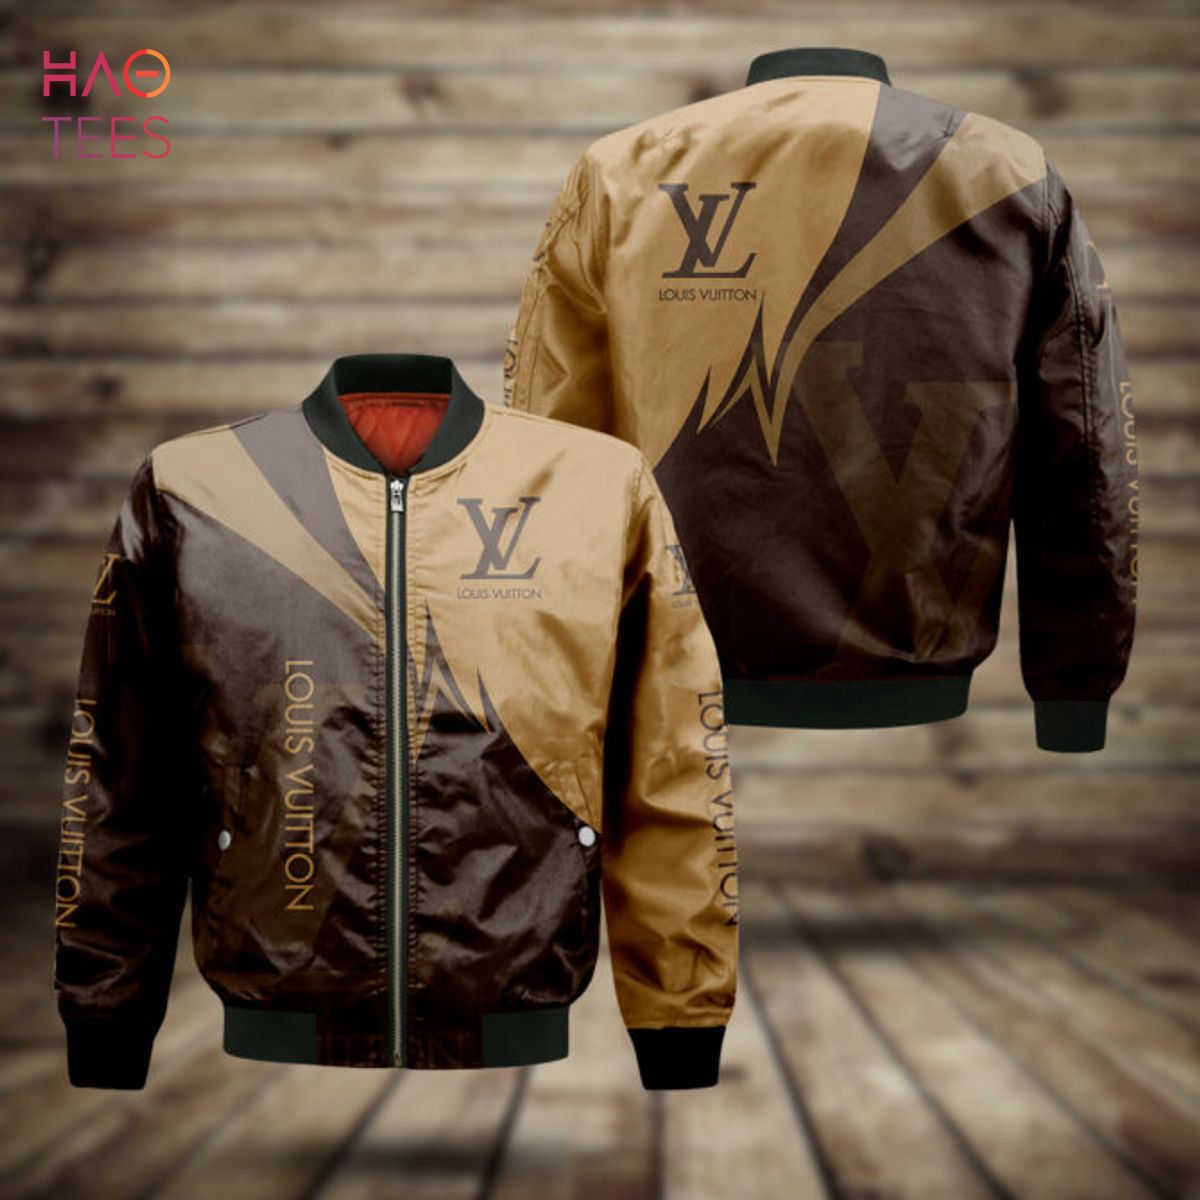 Louis Vuitton Supreme Brown Bomber Jacket Outfit For Men Women Luxury  Bomberjack #bomberjack outfit, by Nadaxaxora